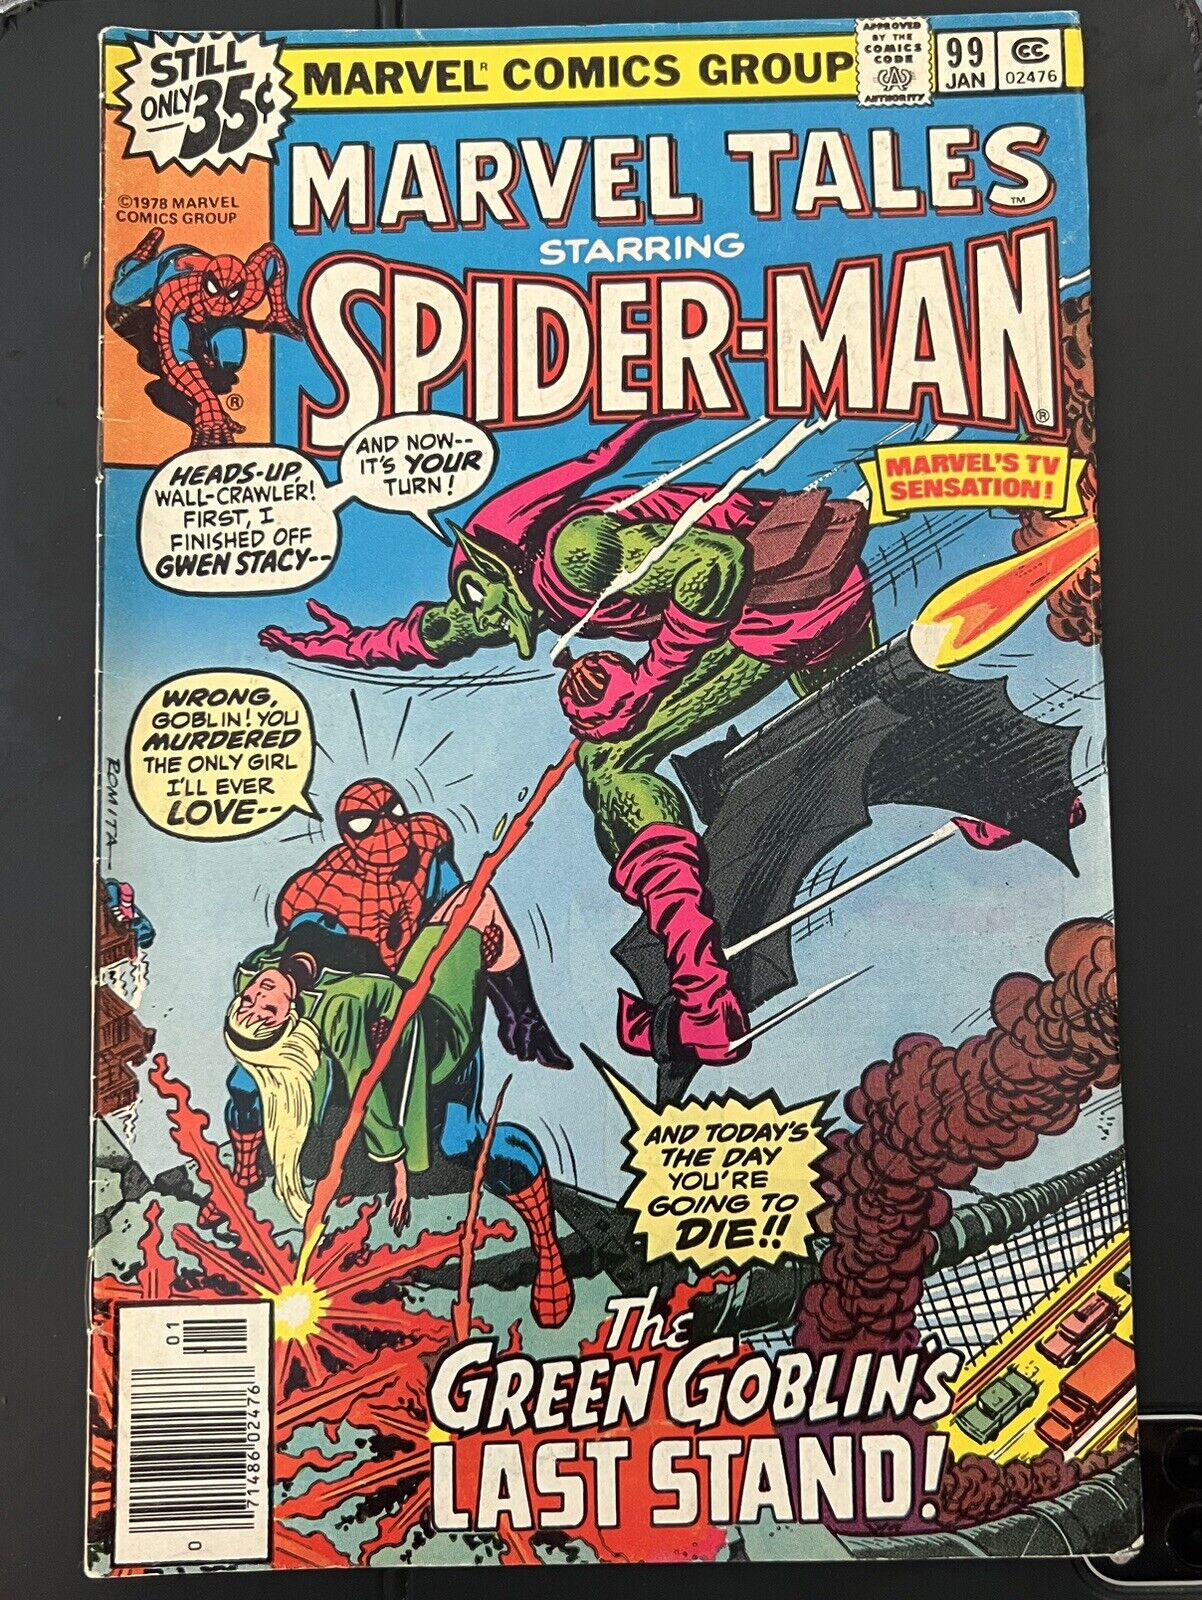 Marvel Tales #99 Starring Spider-Man. The Green Goblin’s Last Stand 1978